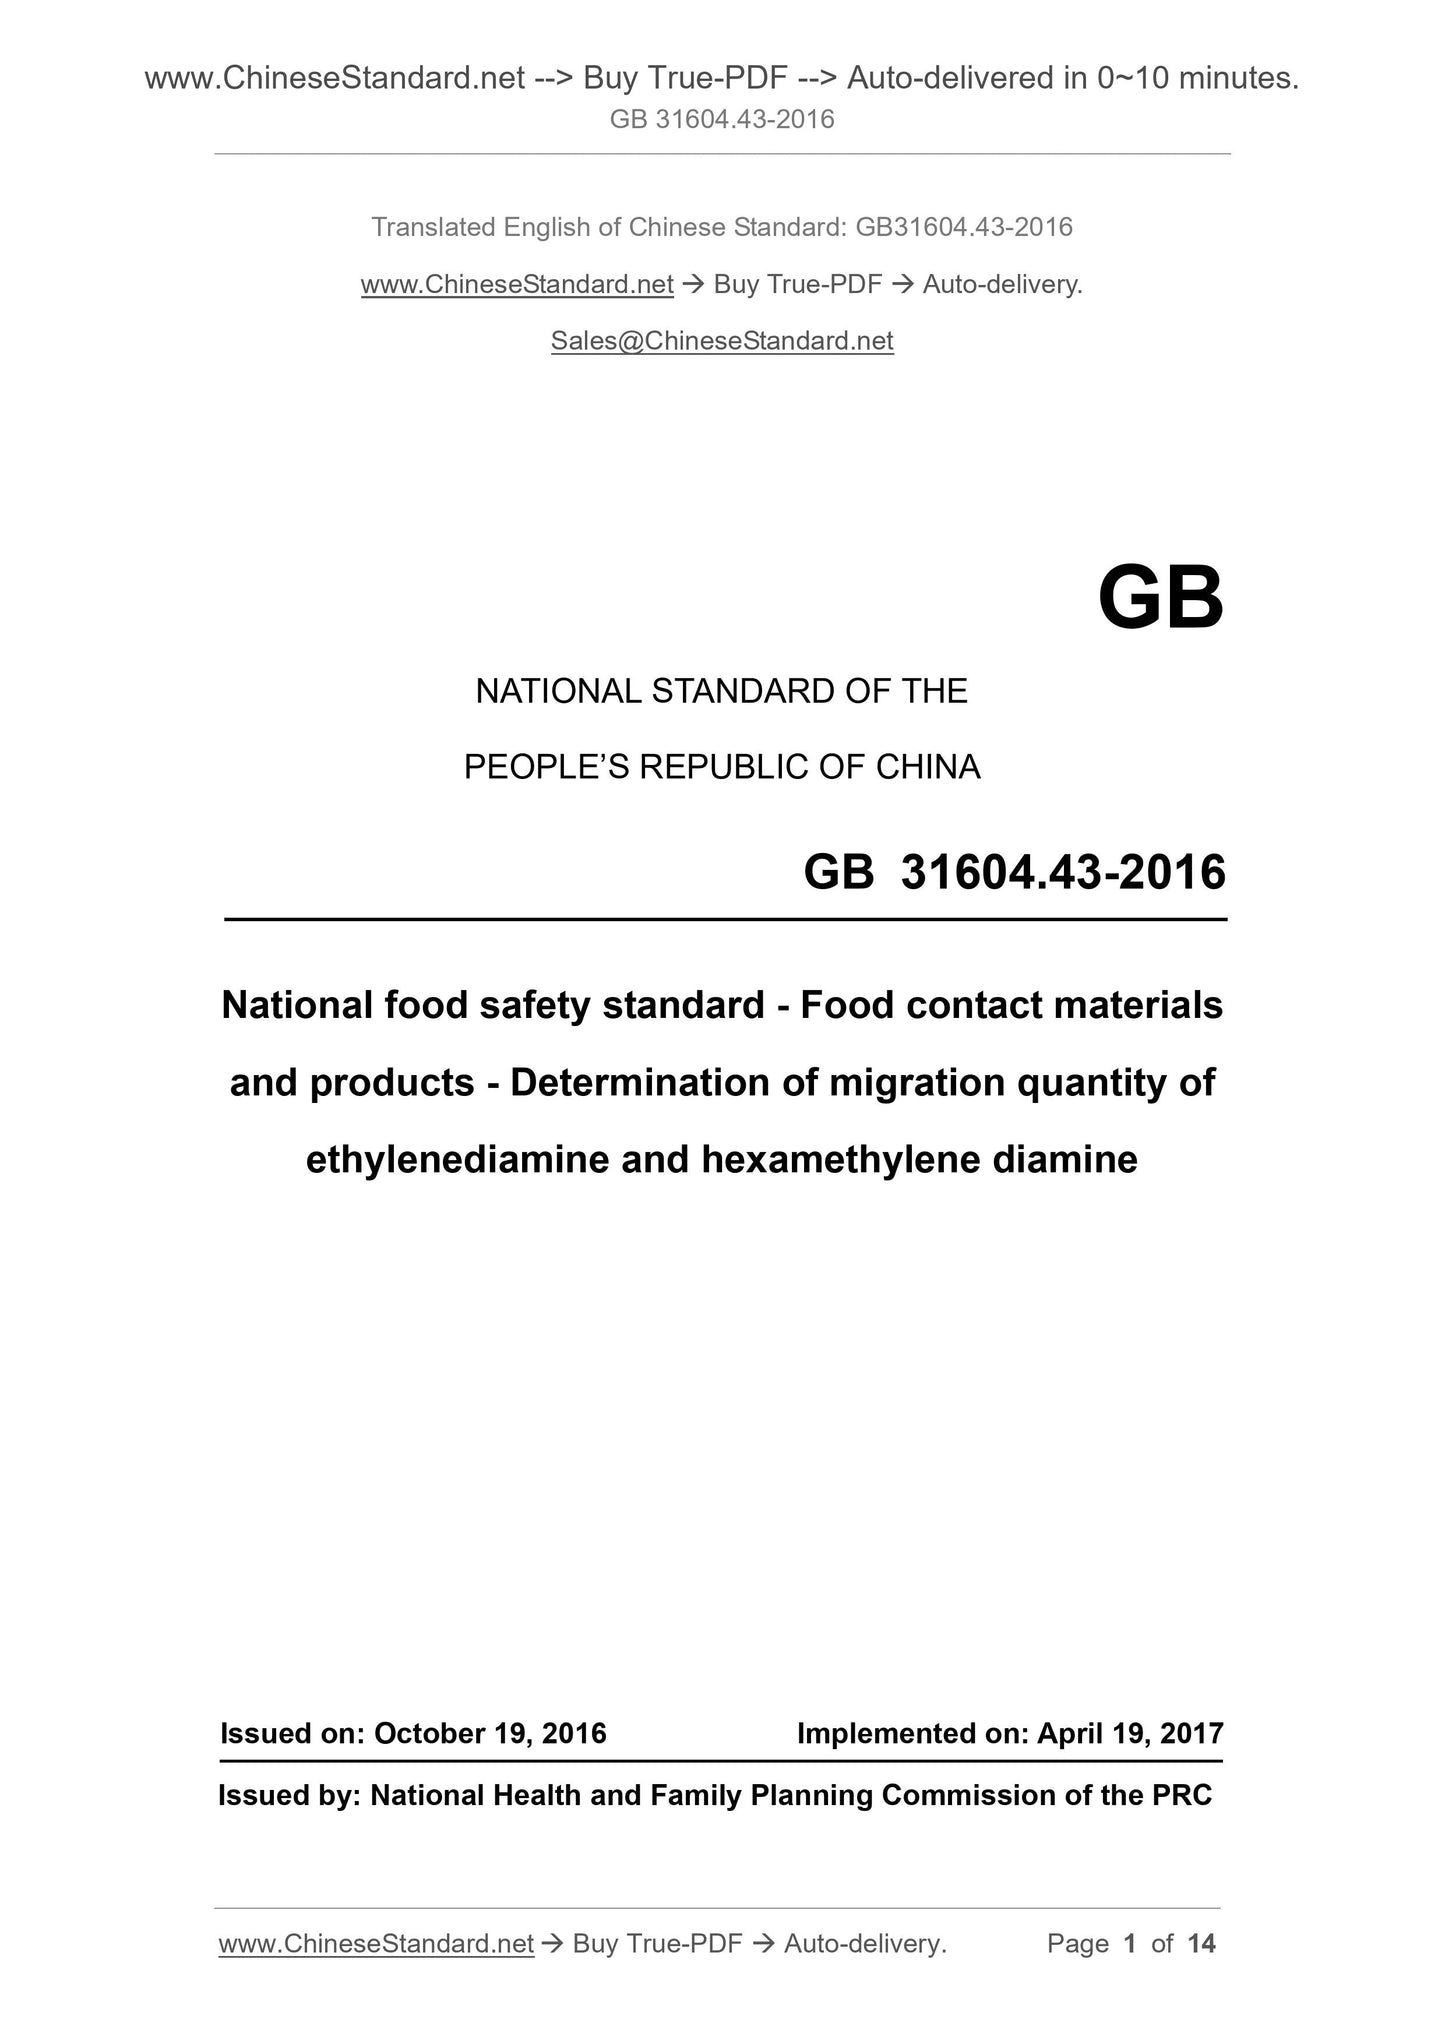 GB 31604.43-2016 Page 1